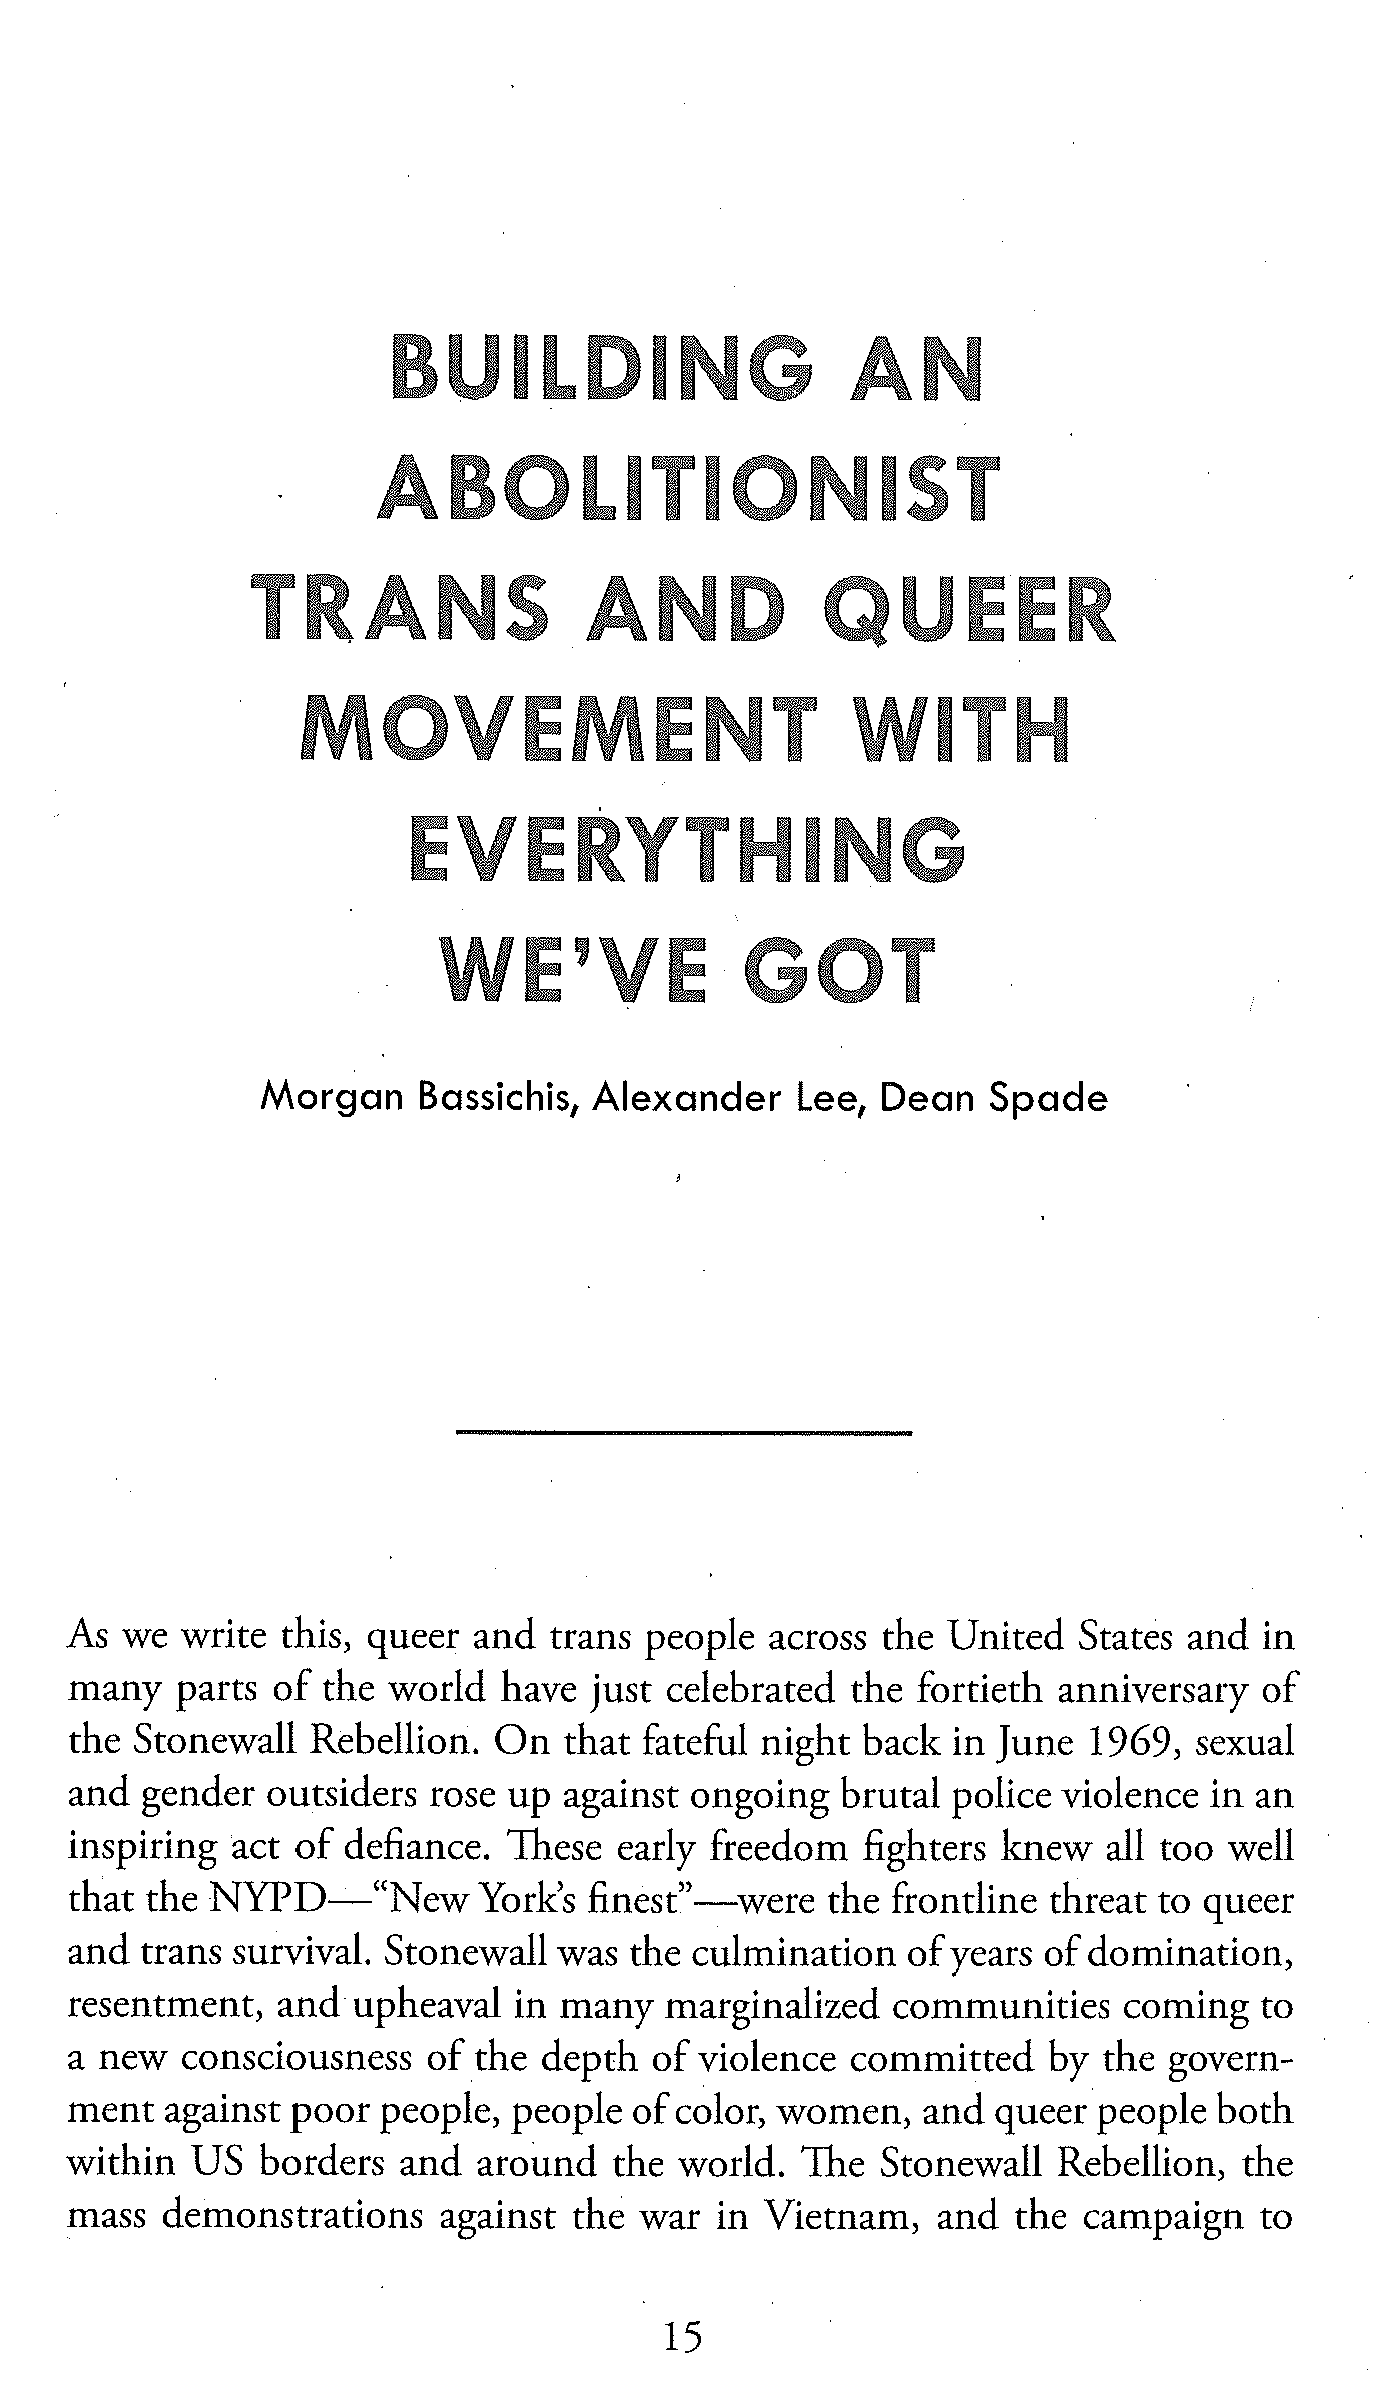 I I ' Morgan Bassichis, Alexander Lee, Dean Spade As we write this, queer and trans people across the United States and in many parts of the world have just celebrated the fortieth anniversary of the